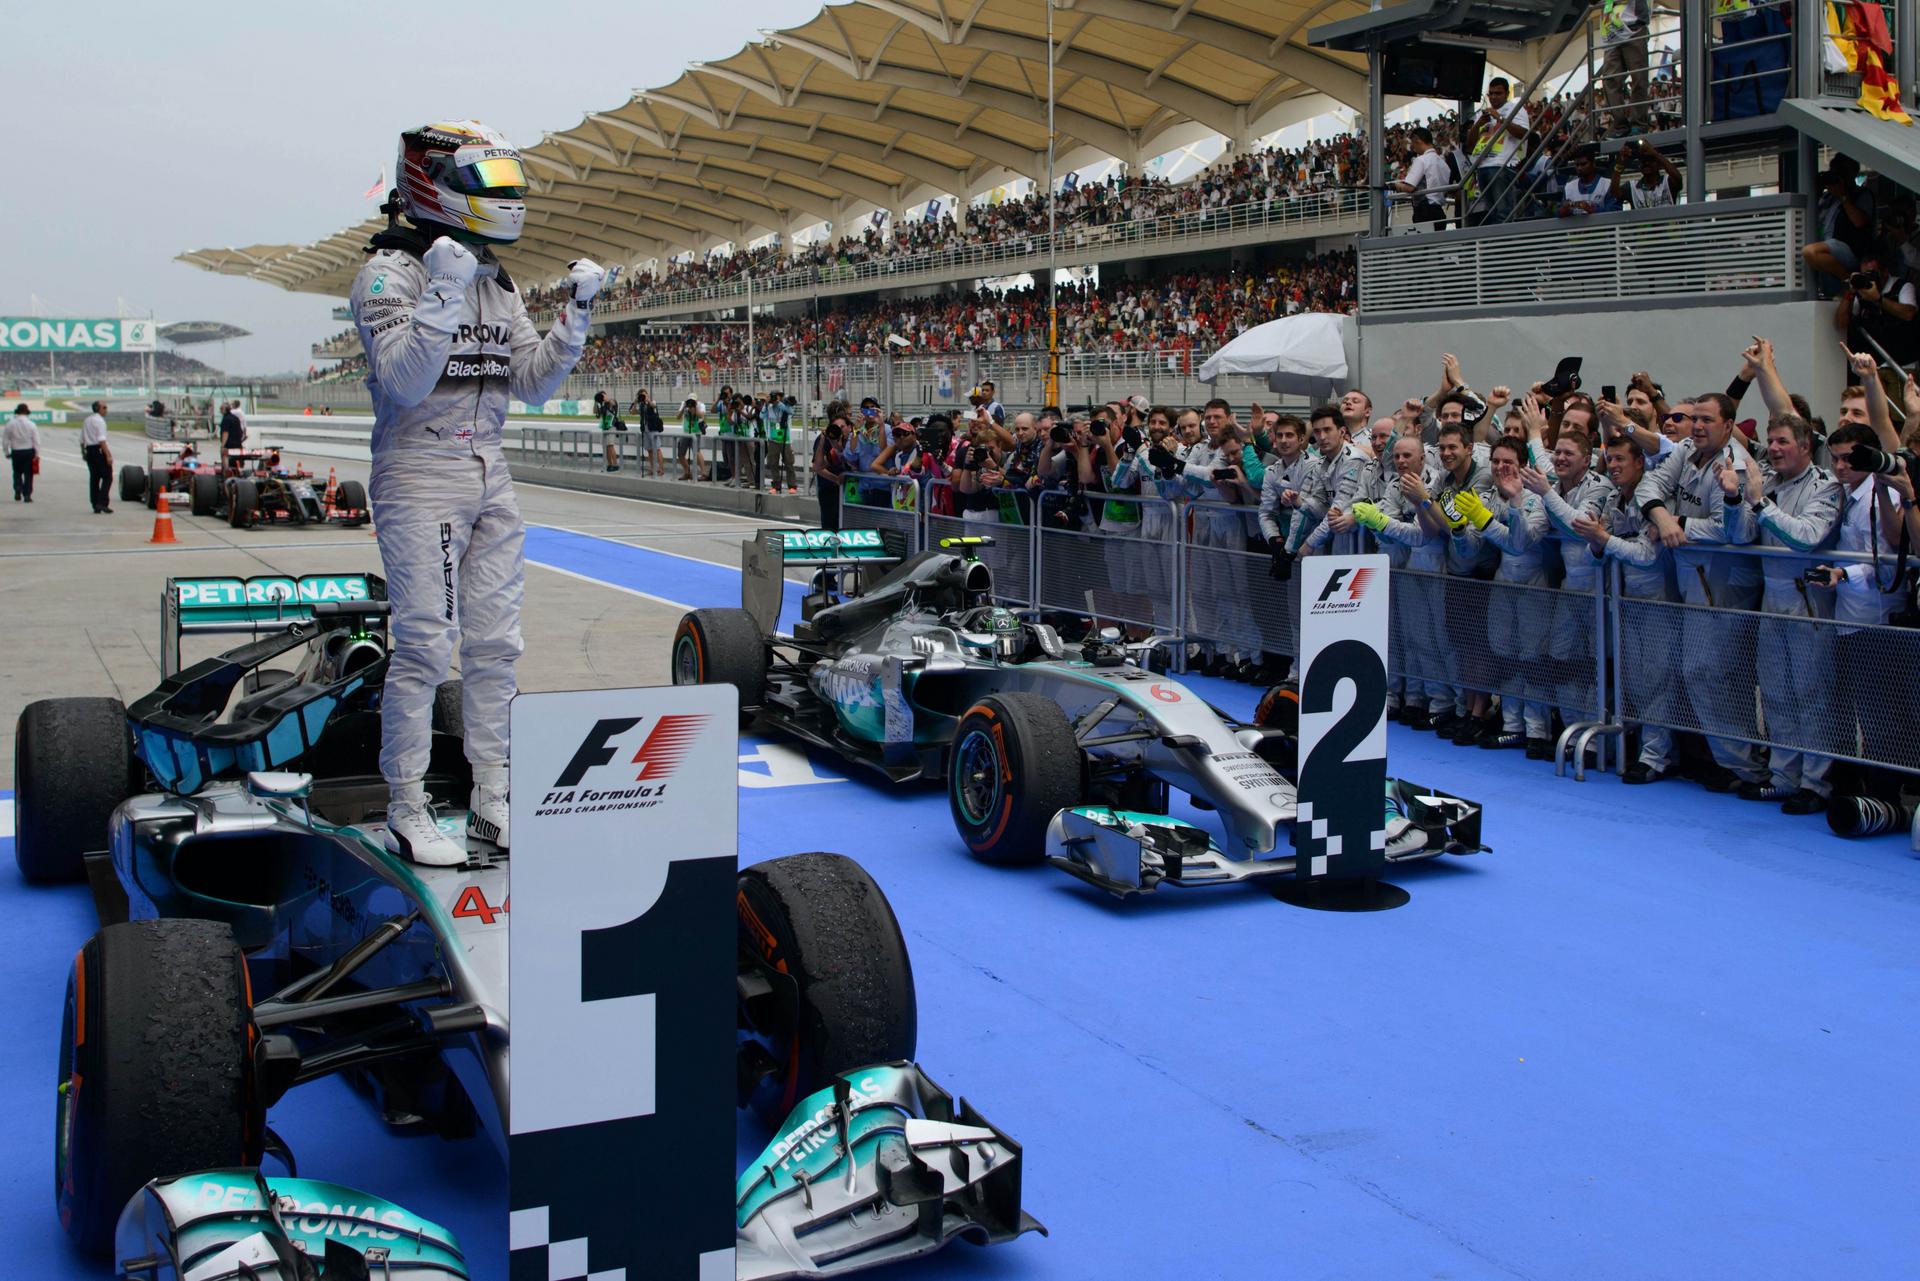 Mercedes' Lewis Hamilton of Britain stands on his car after winning the Malaysian Grand Prix in a one-two finish for his team. Photo: AFP